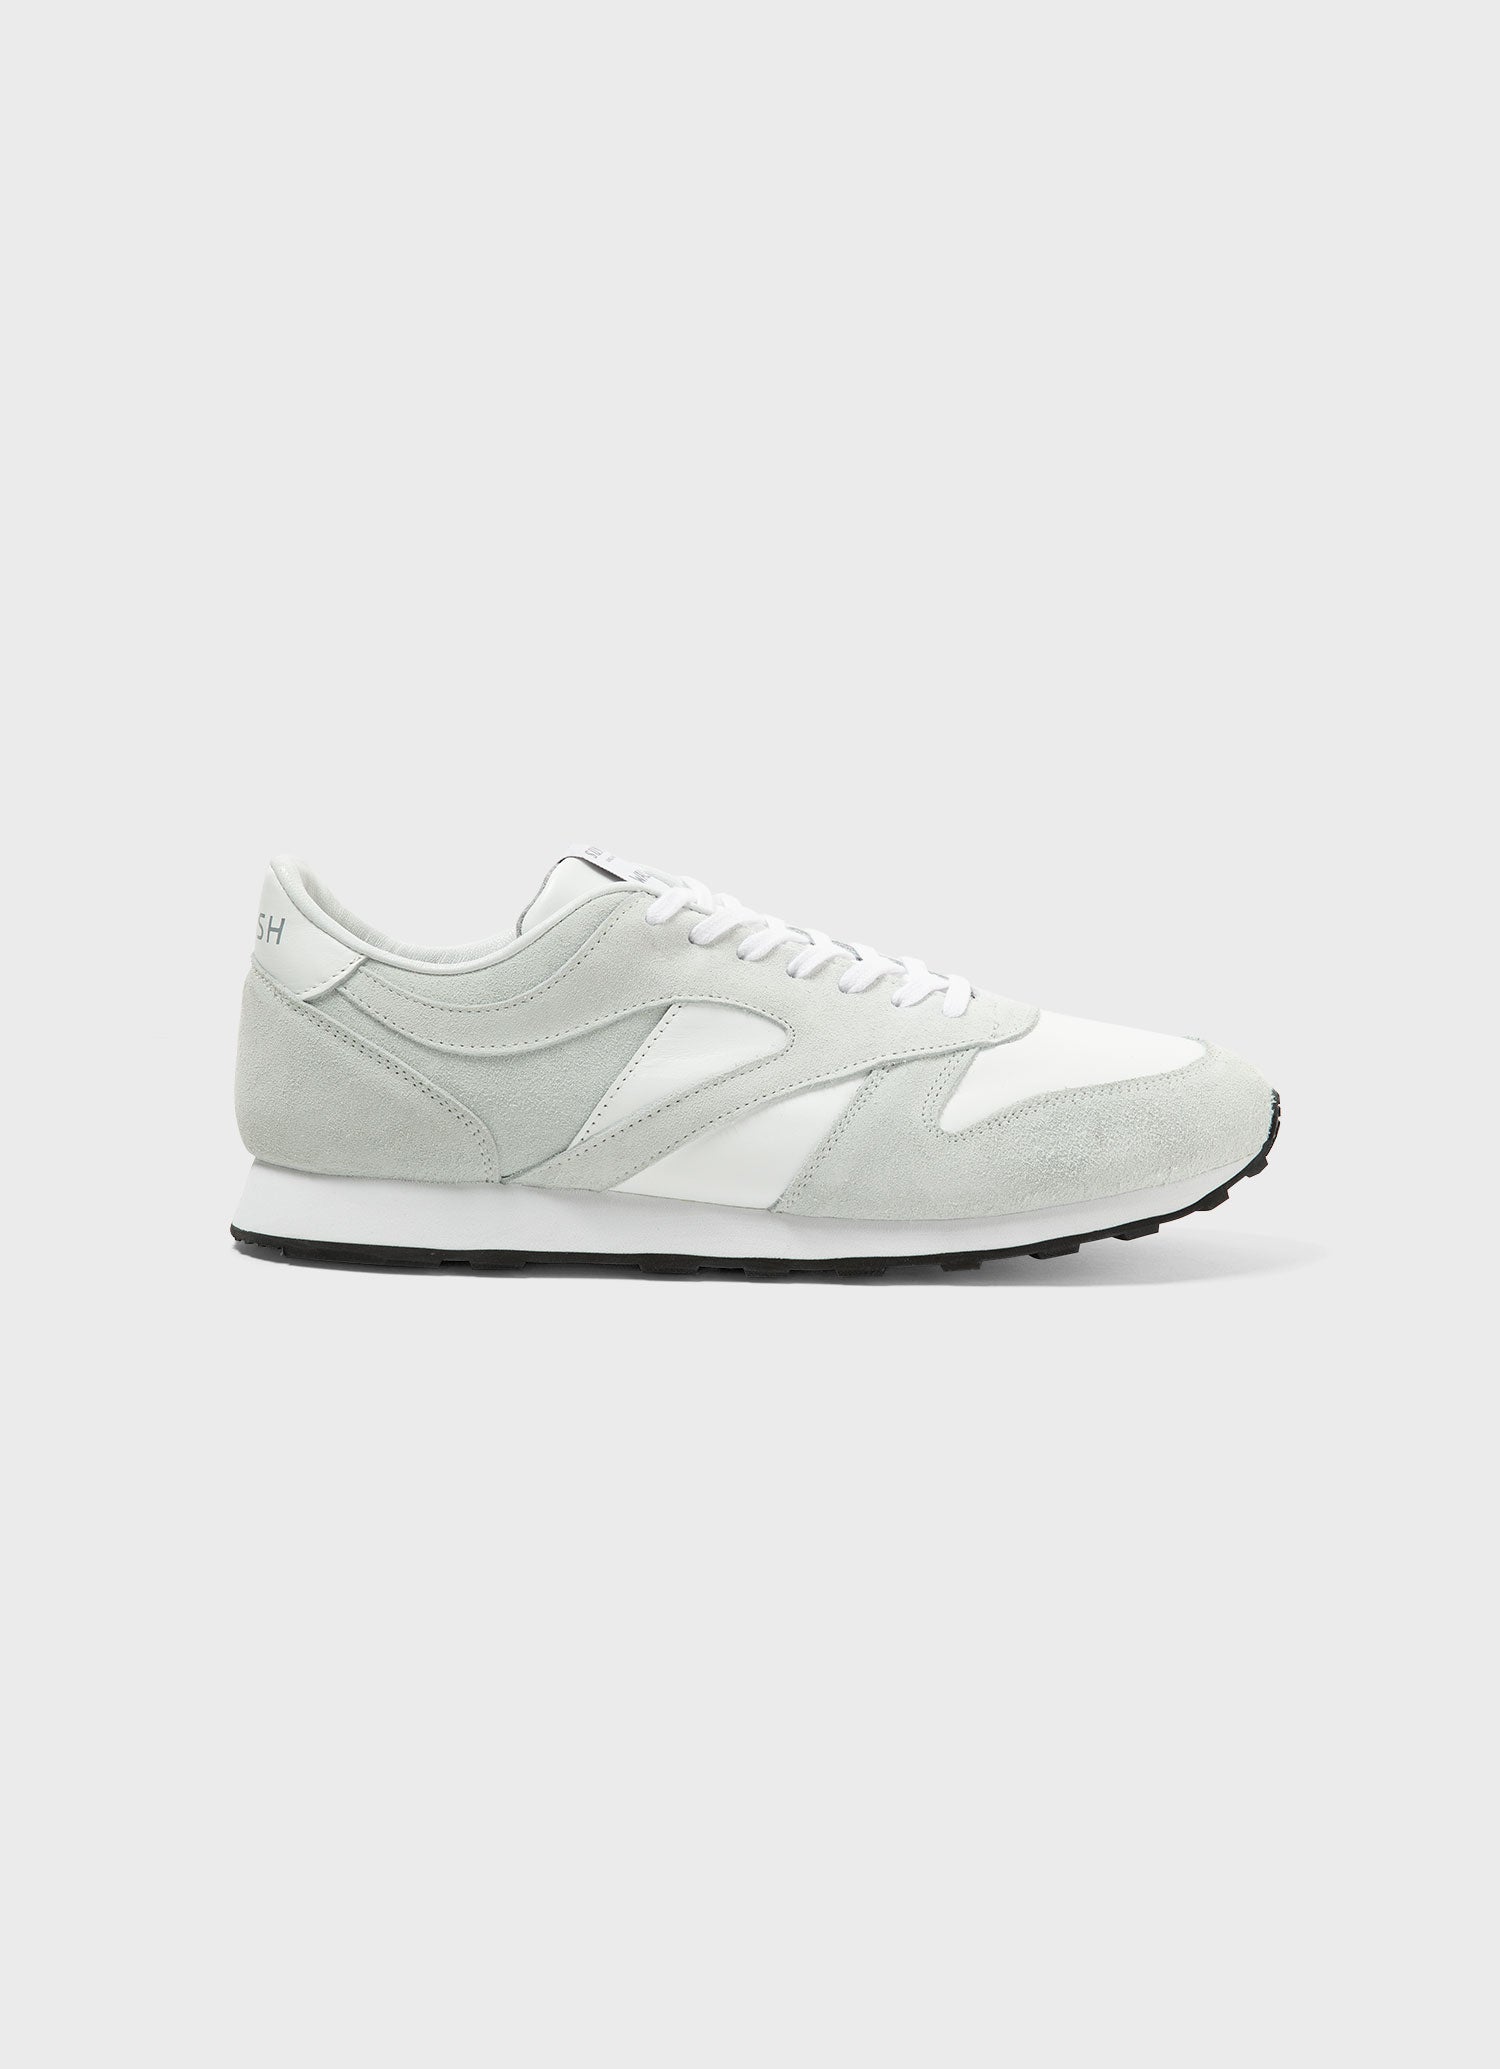 Sunspel and Walsh Trainer in White